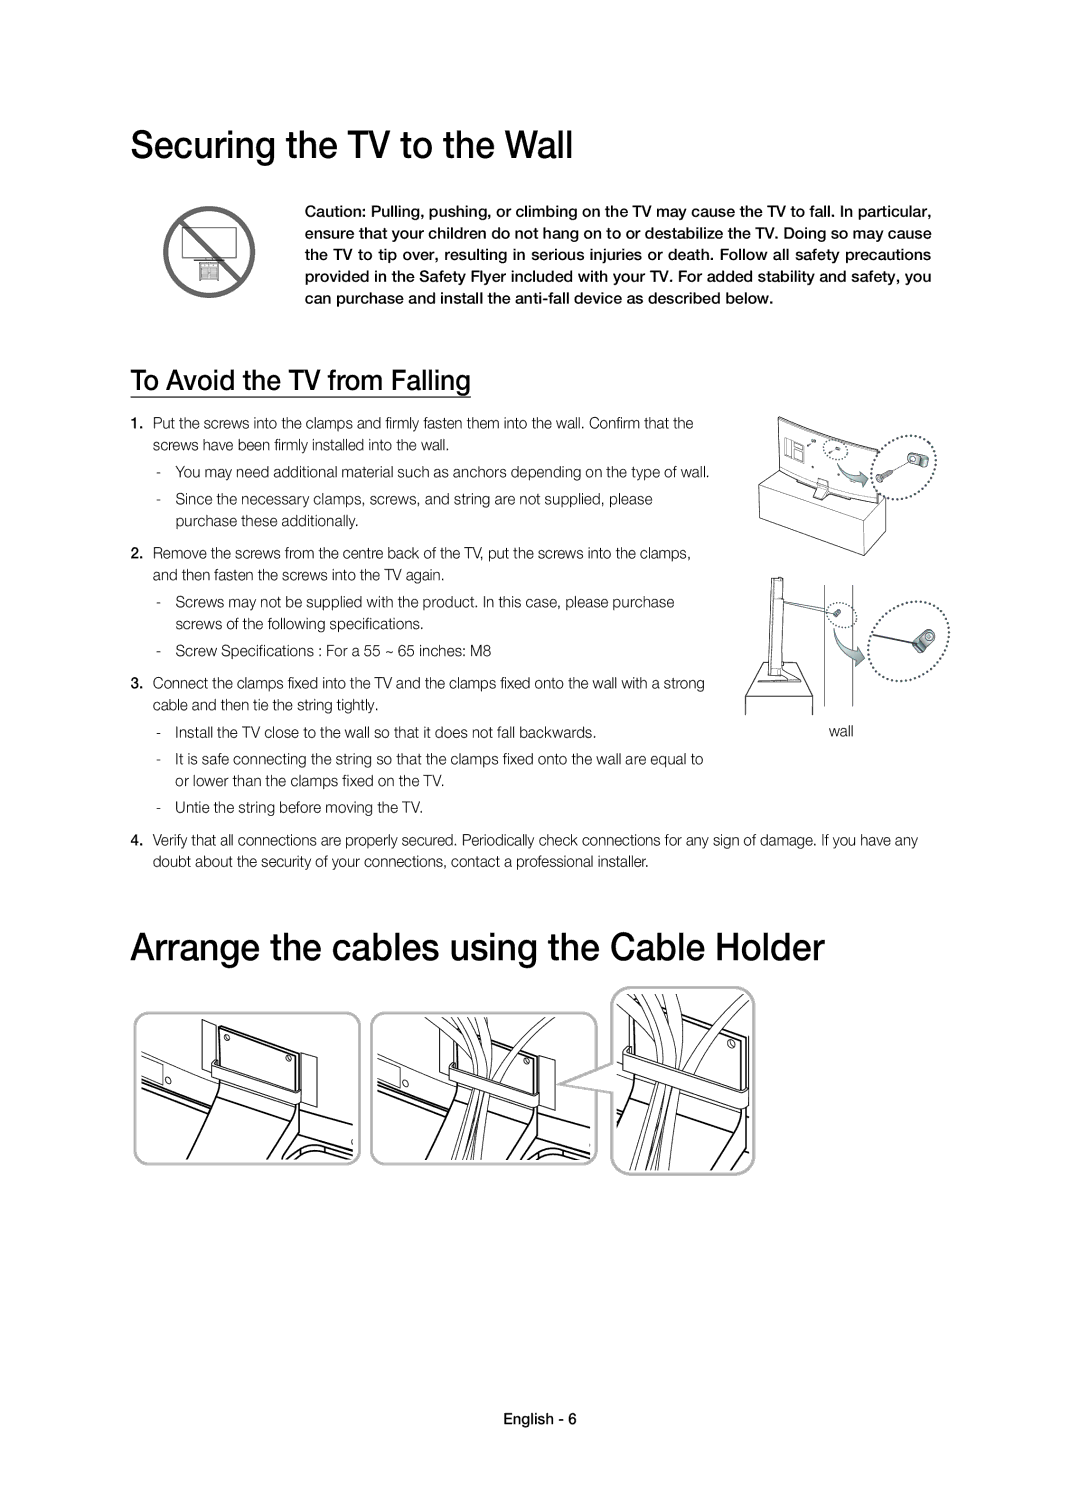 Samsung UE55HU7200SXZF, UE55HU7200SXZG manual Securing the TV to the Wall, Arrange the cables using the Cable Holder 